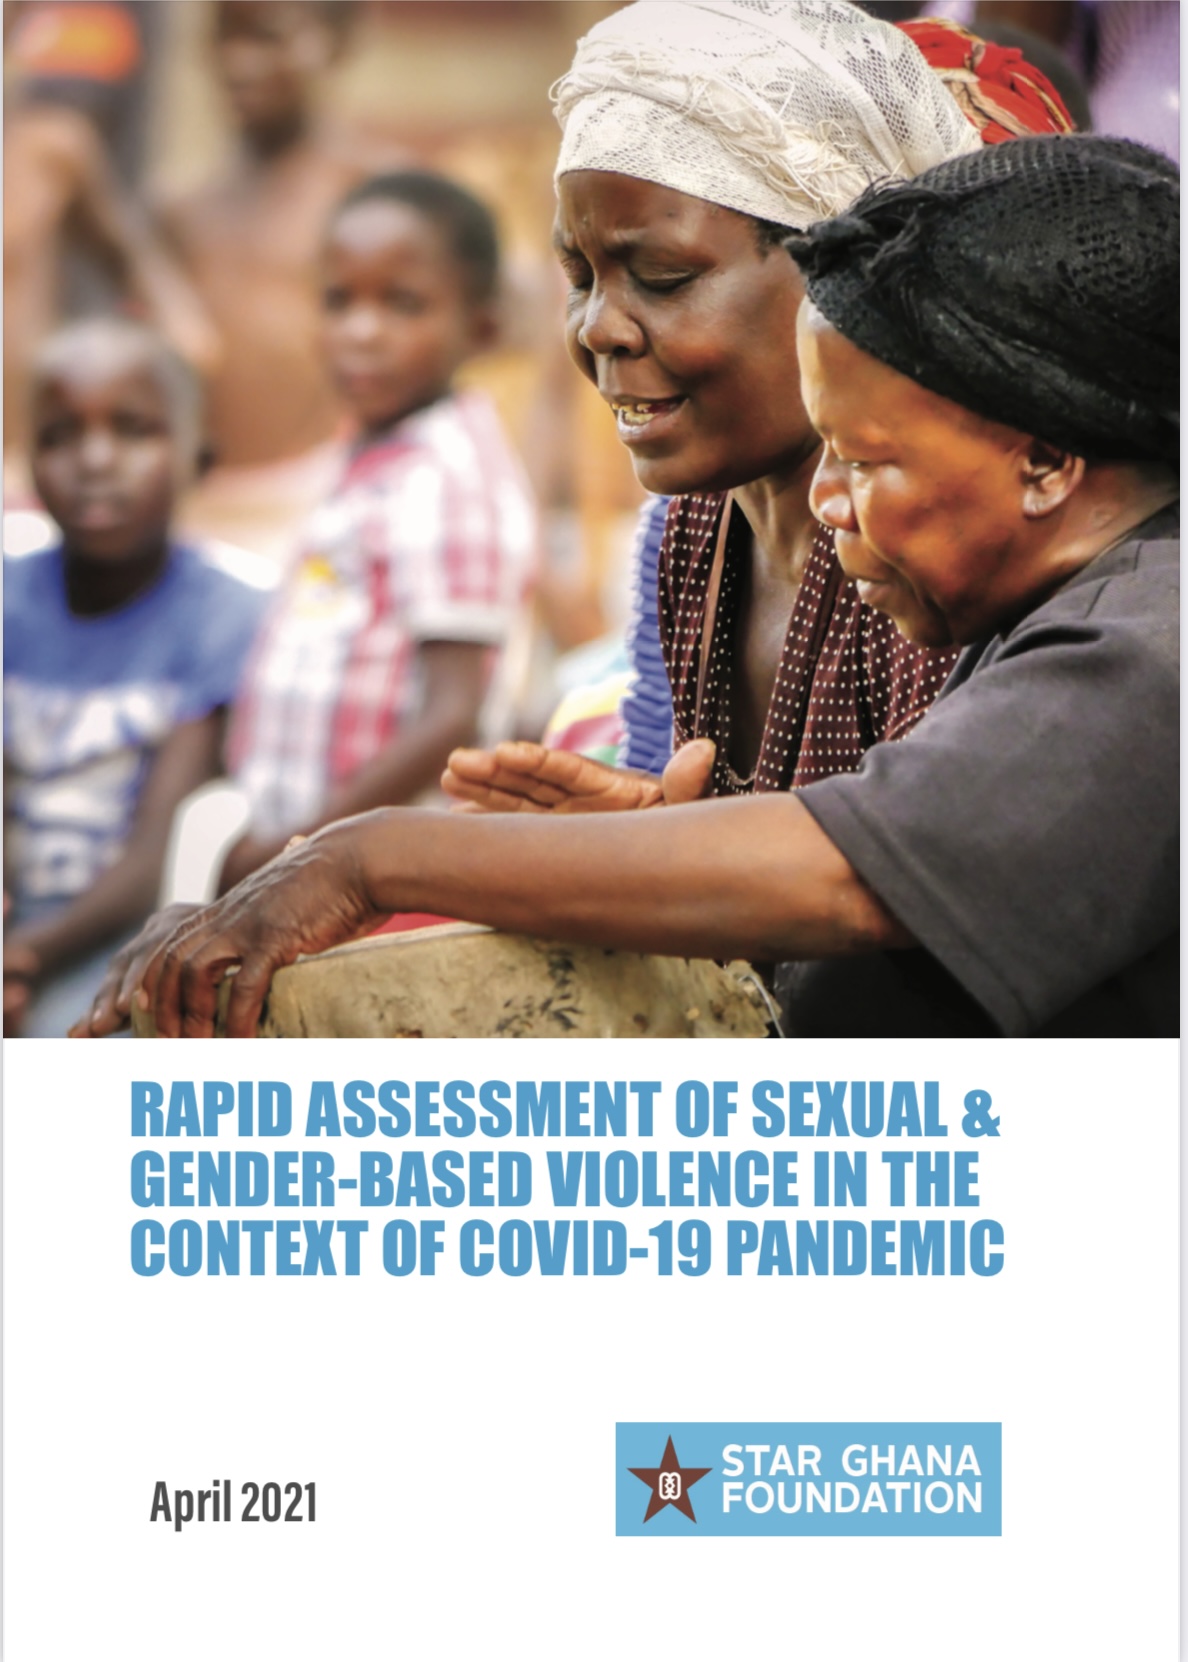 Rapid Assessment of Sexual and Gender-Based Violence in the Context of COVID-19 Pandemic